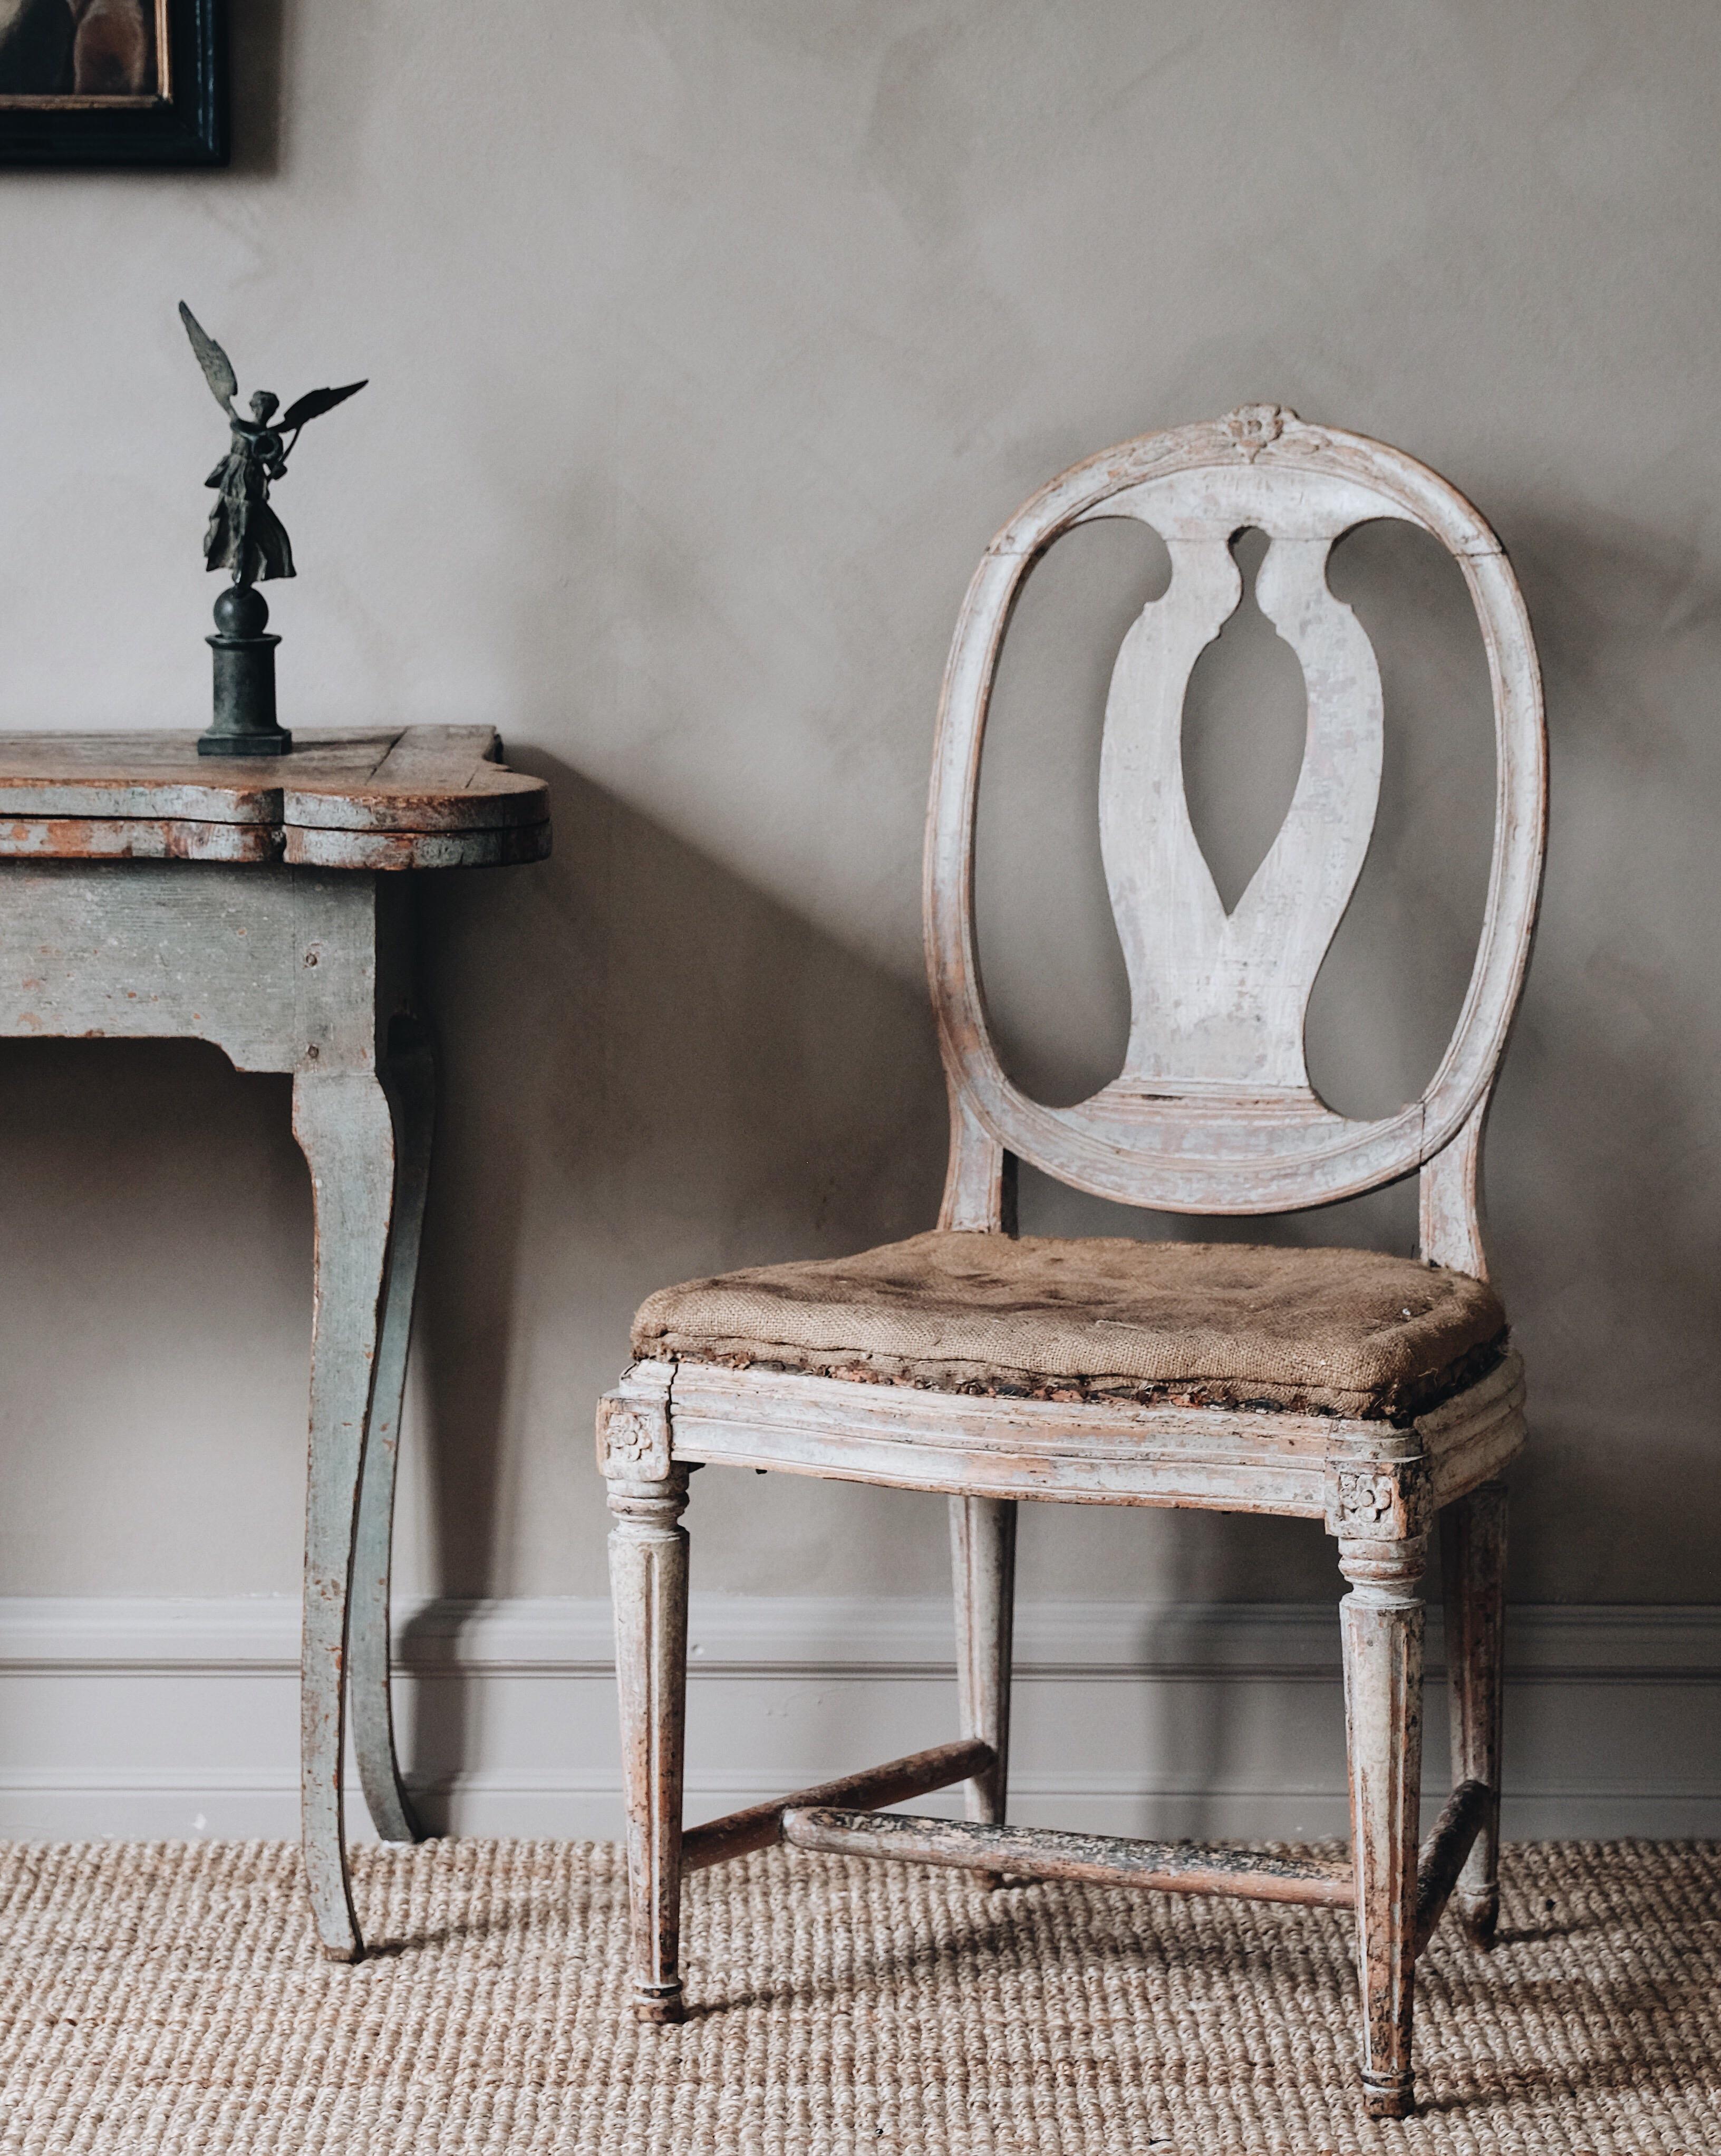 Fine antique 18th century Gustavian chair in great original condition. This type of chair is called the Swedish model. This particular example is unusually large with original colour and fantastic patination, circa 1790. Scandinavian Sweden. 